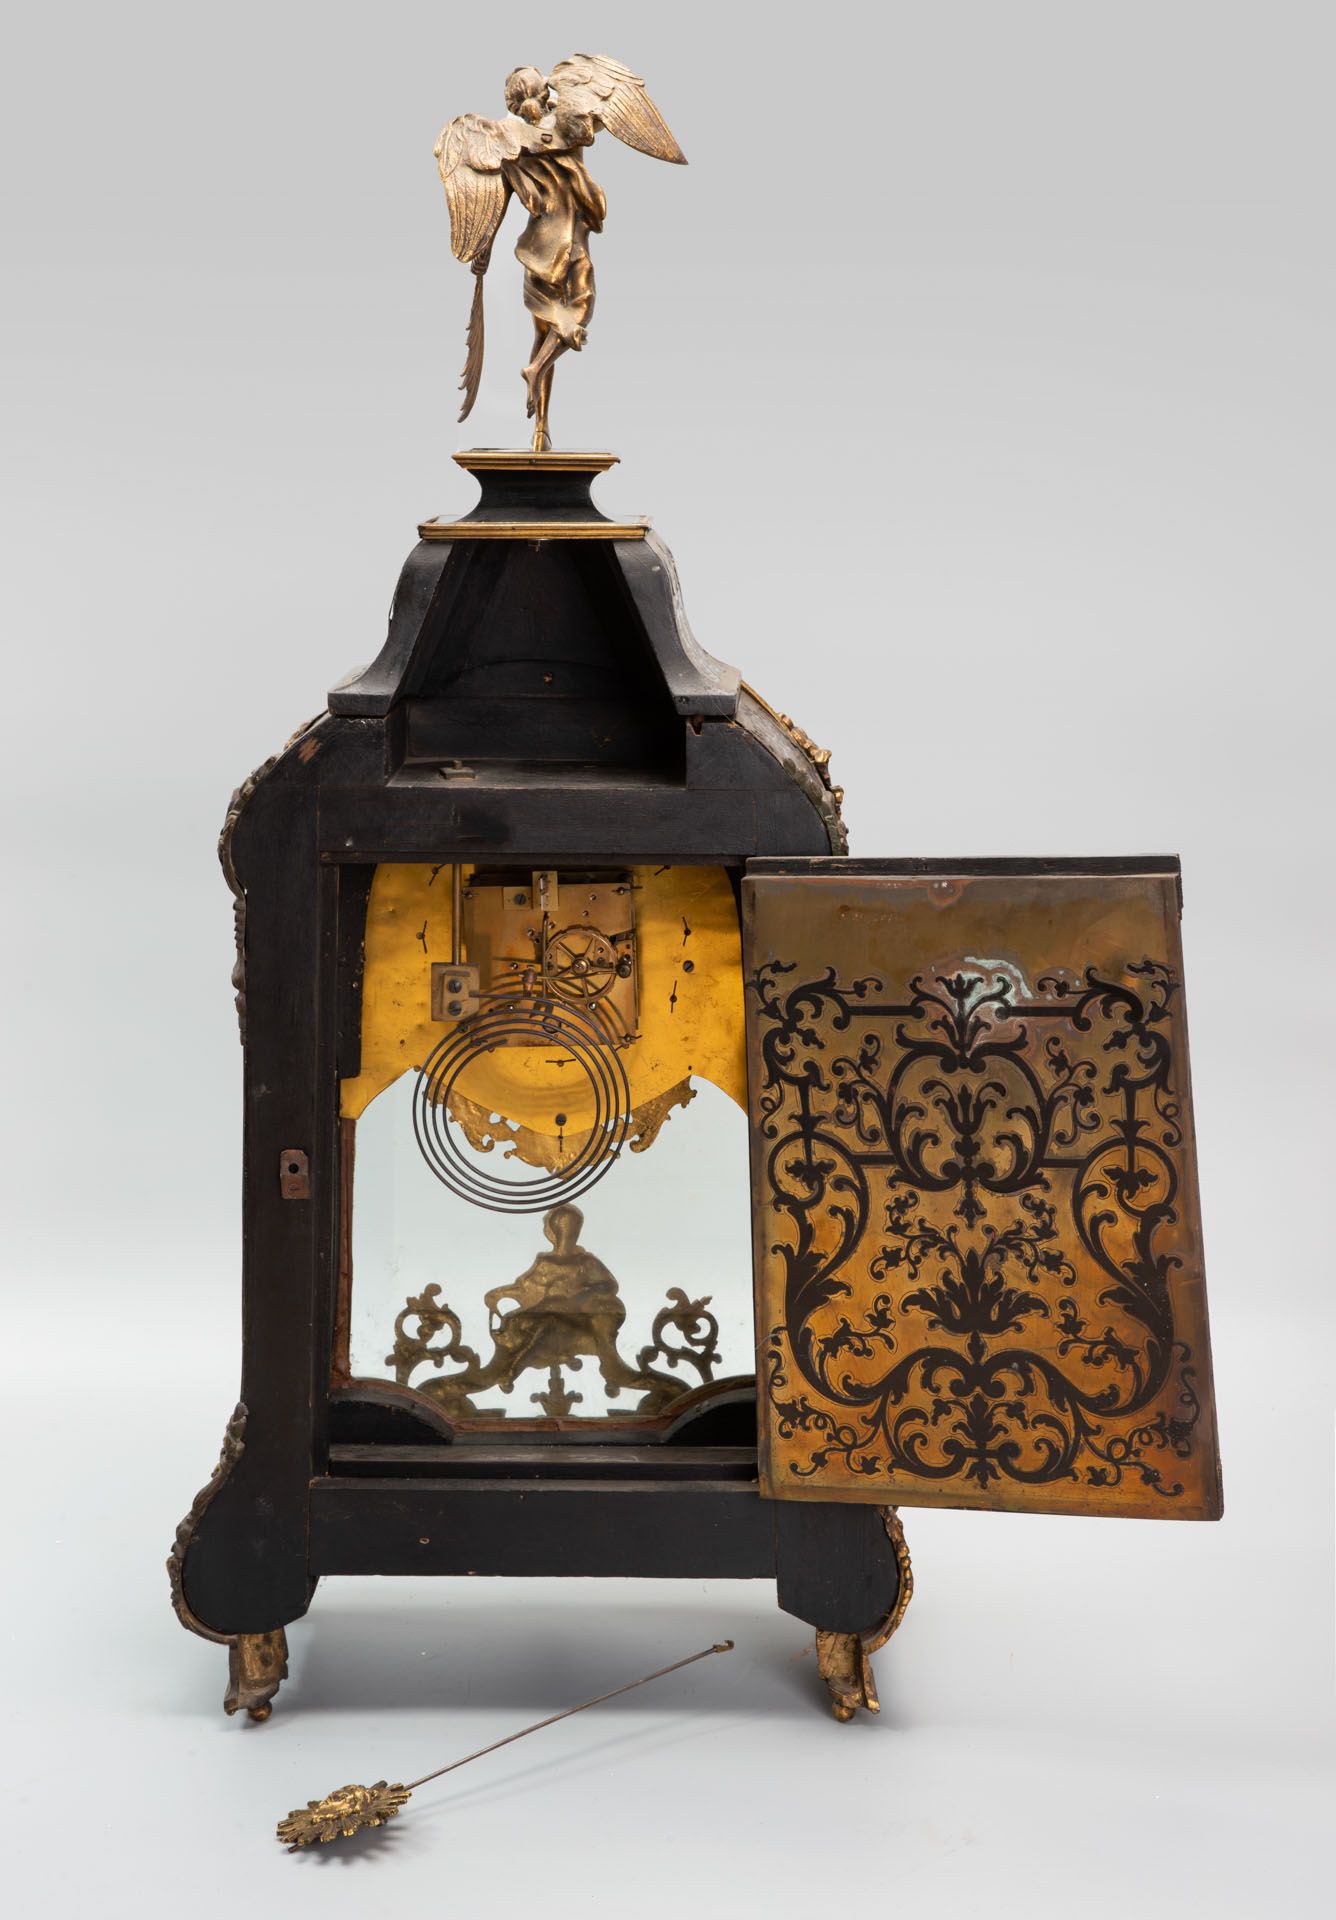 A Fine Boulle Clock by Charles Baltazar, France, Mid-Late 18th Century - Image 5 of 5